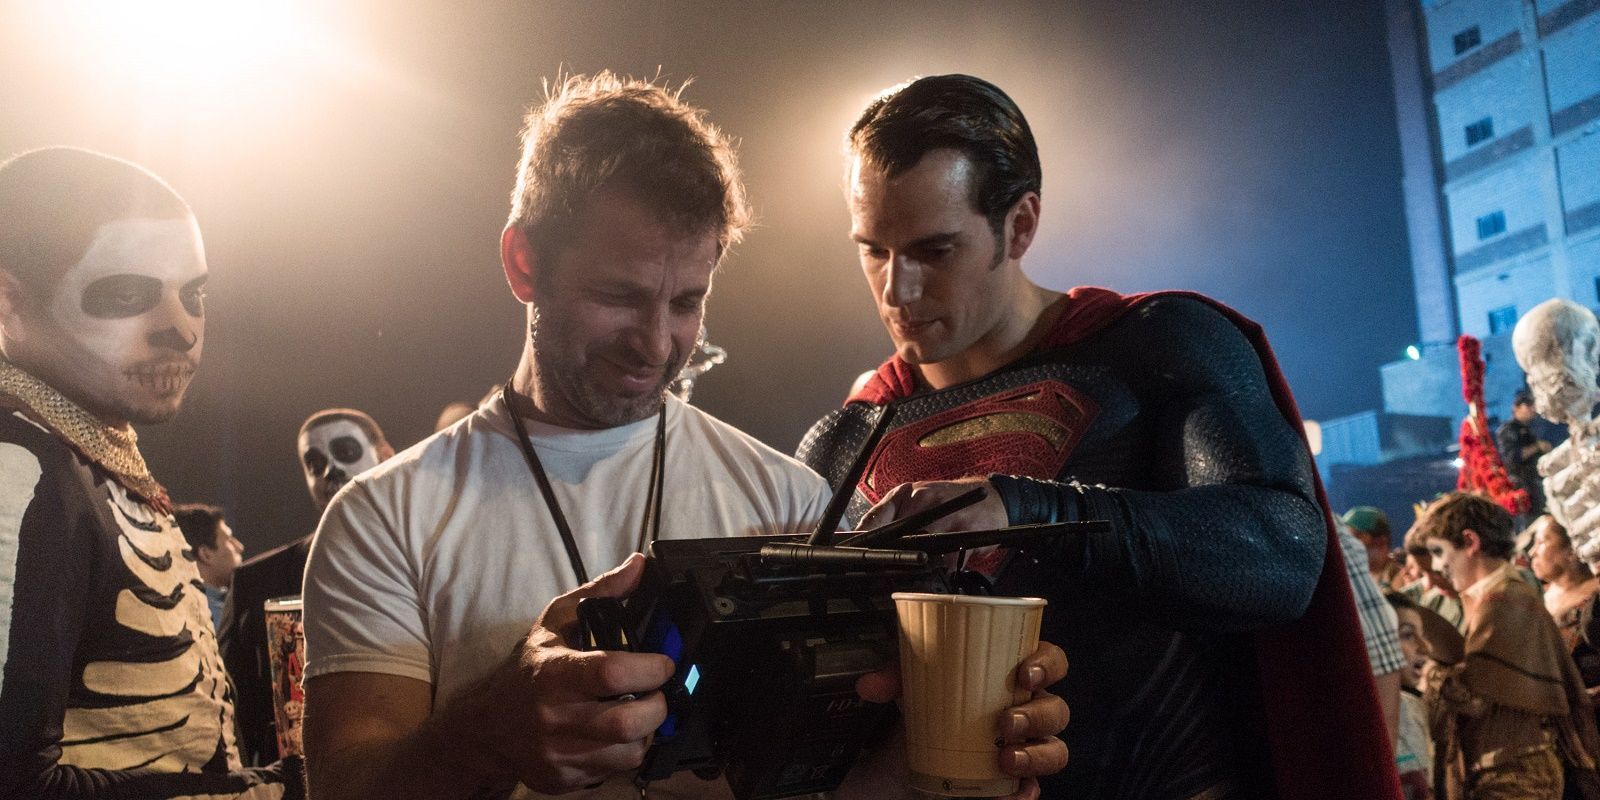 Rumor Zack Snyder Wont Return to Direct Justice League 2